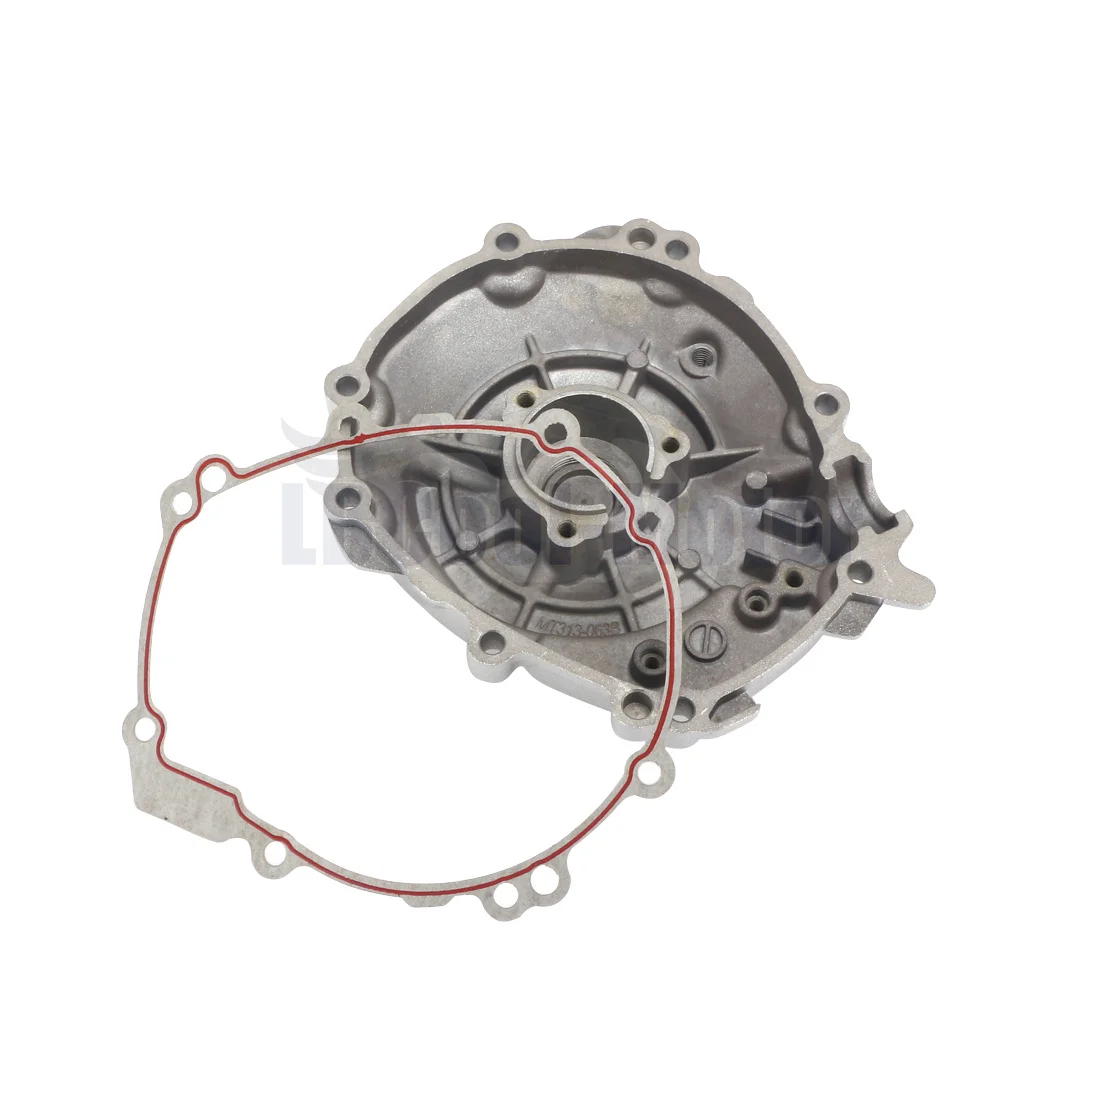 

Motorcycle Engine Stator Crankcase Cover Gasket Set For YAMAHA R1 2015-2016 R1M 2015-2016 2CR-15451-00-00